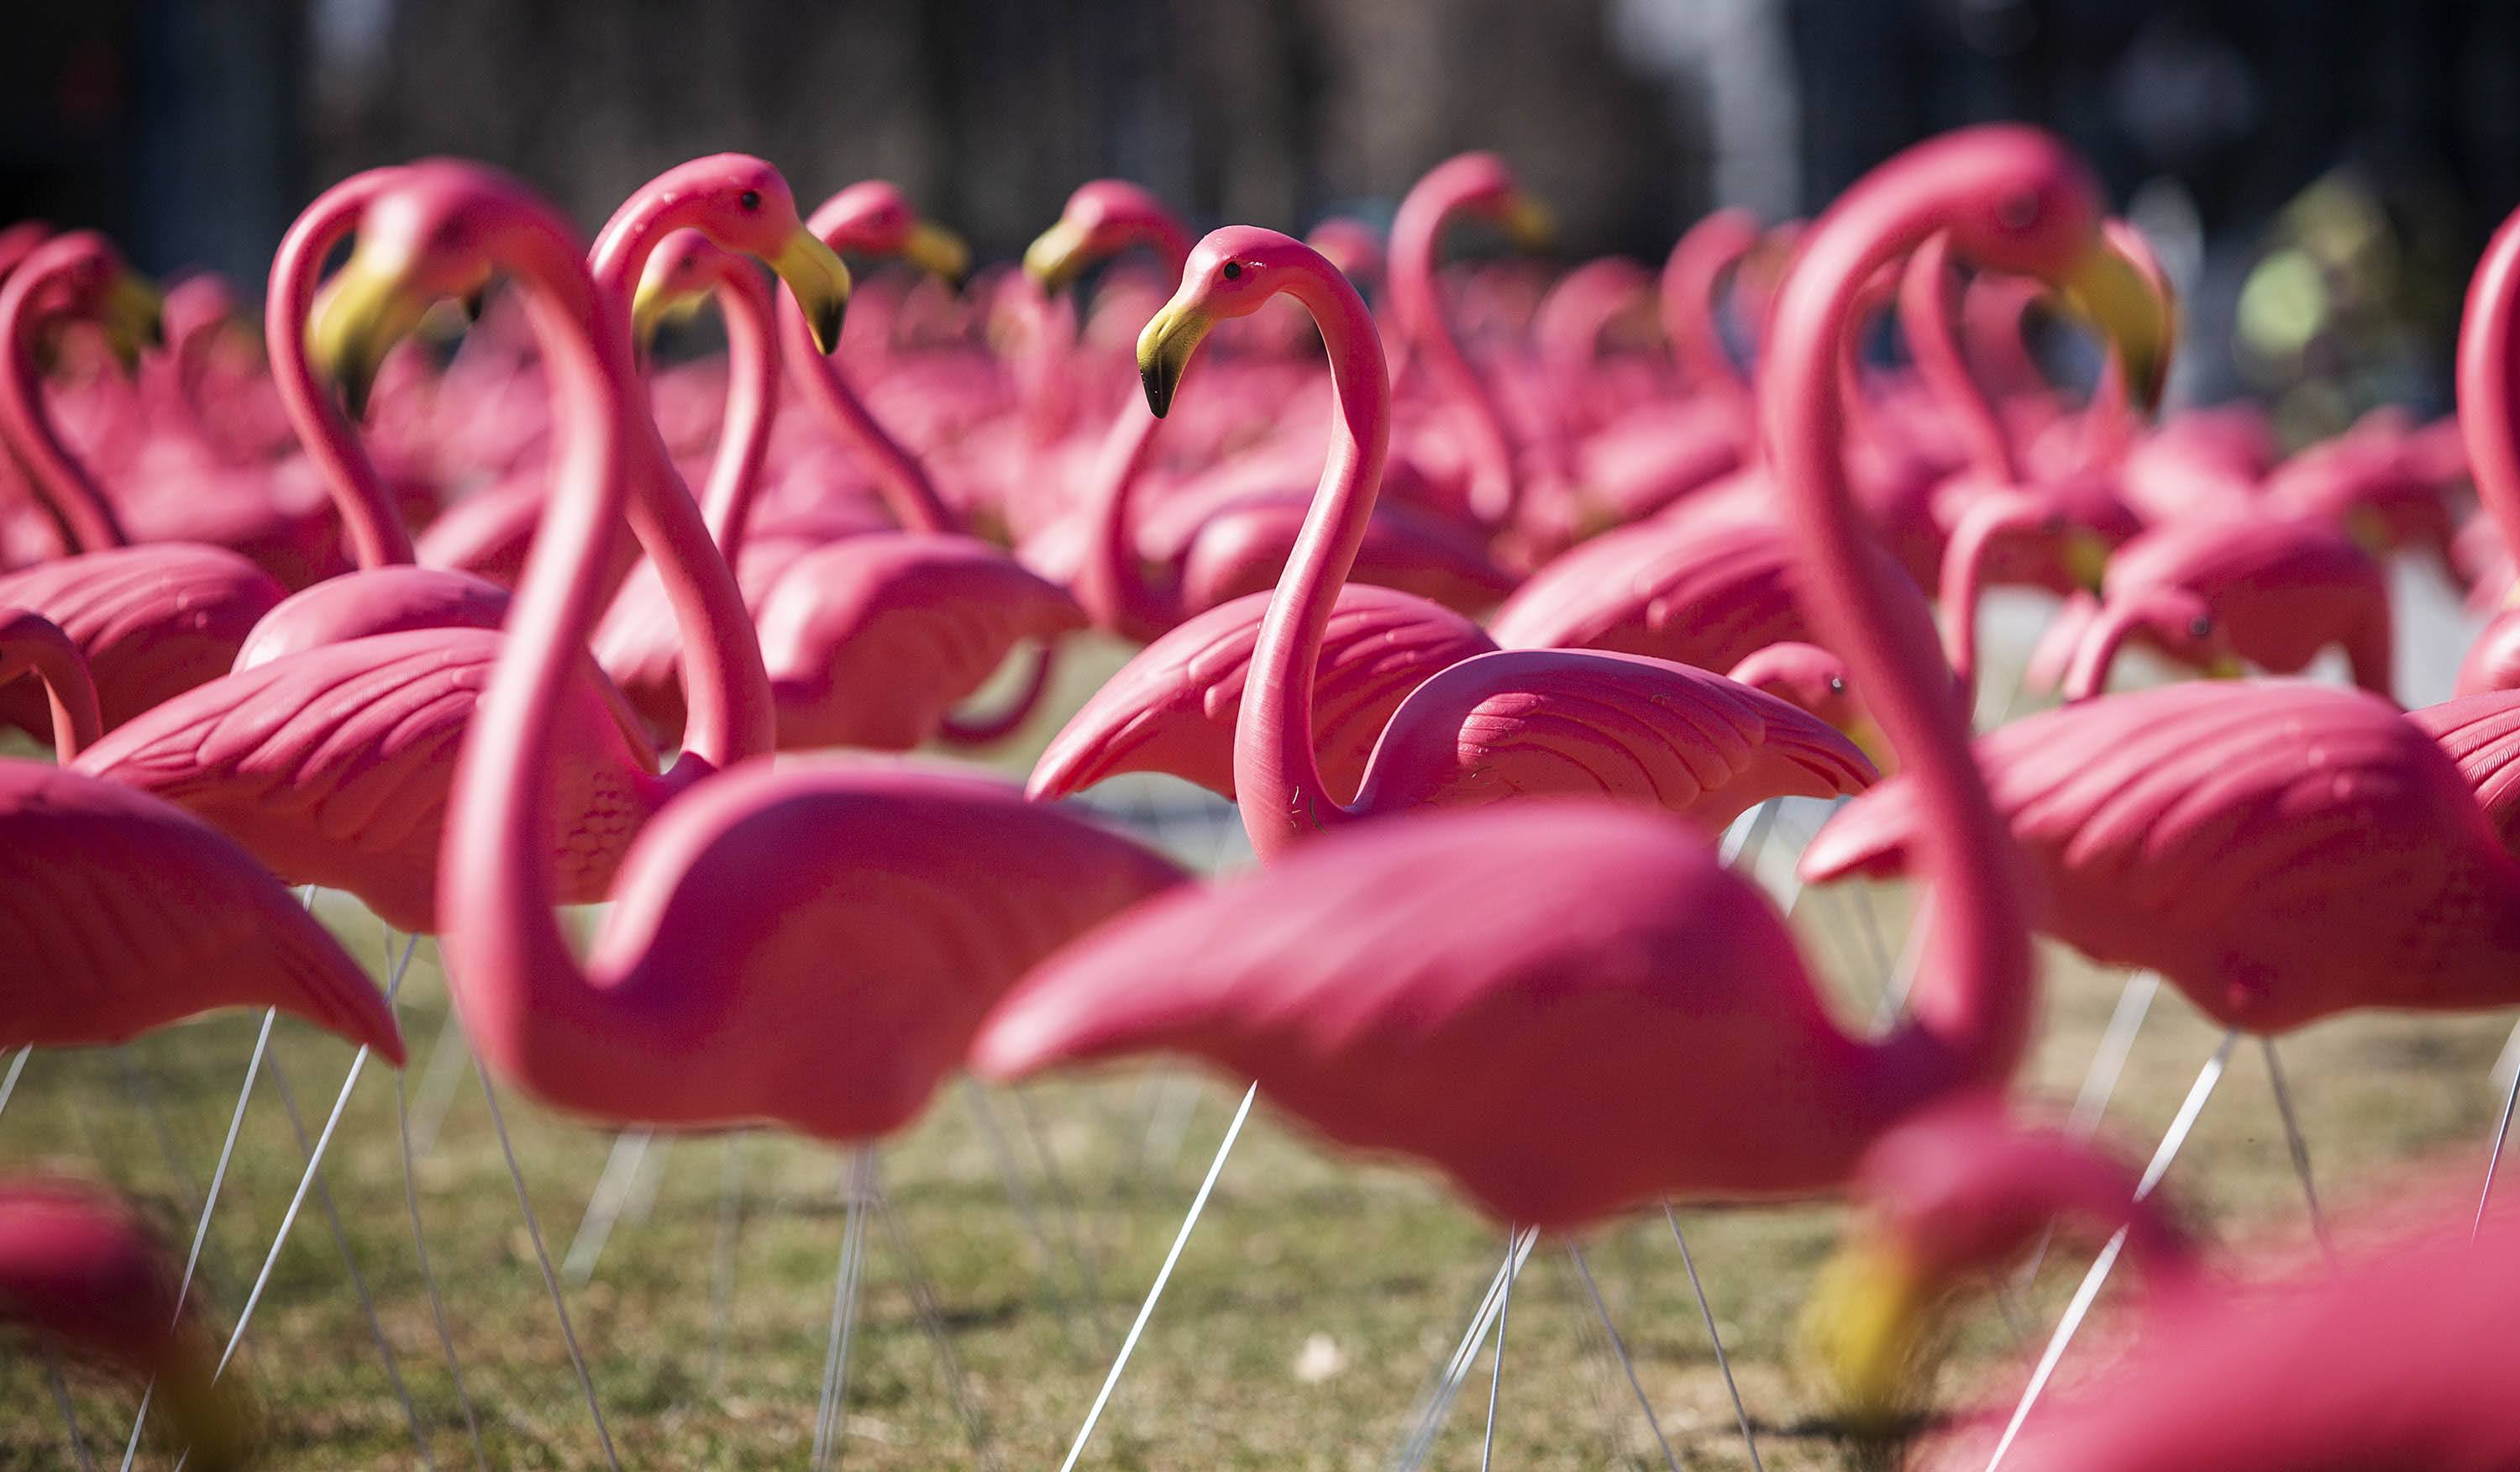 The colony of flamingos enjoys some spring sunshine on its first morning on the Seaport Common. (Robin Lubbock/WBUR)